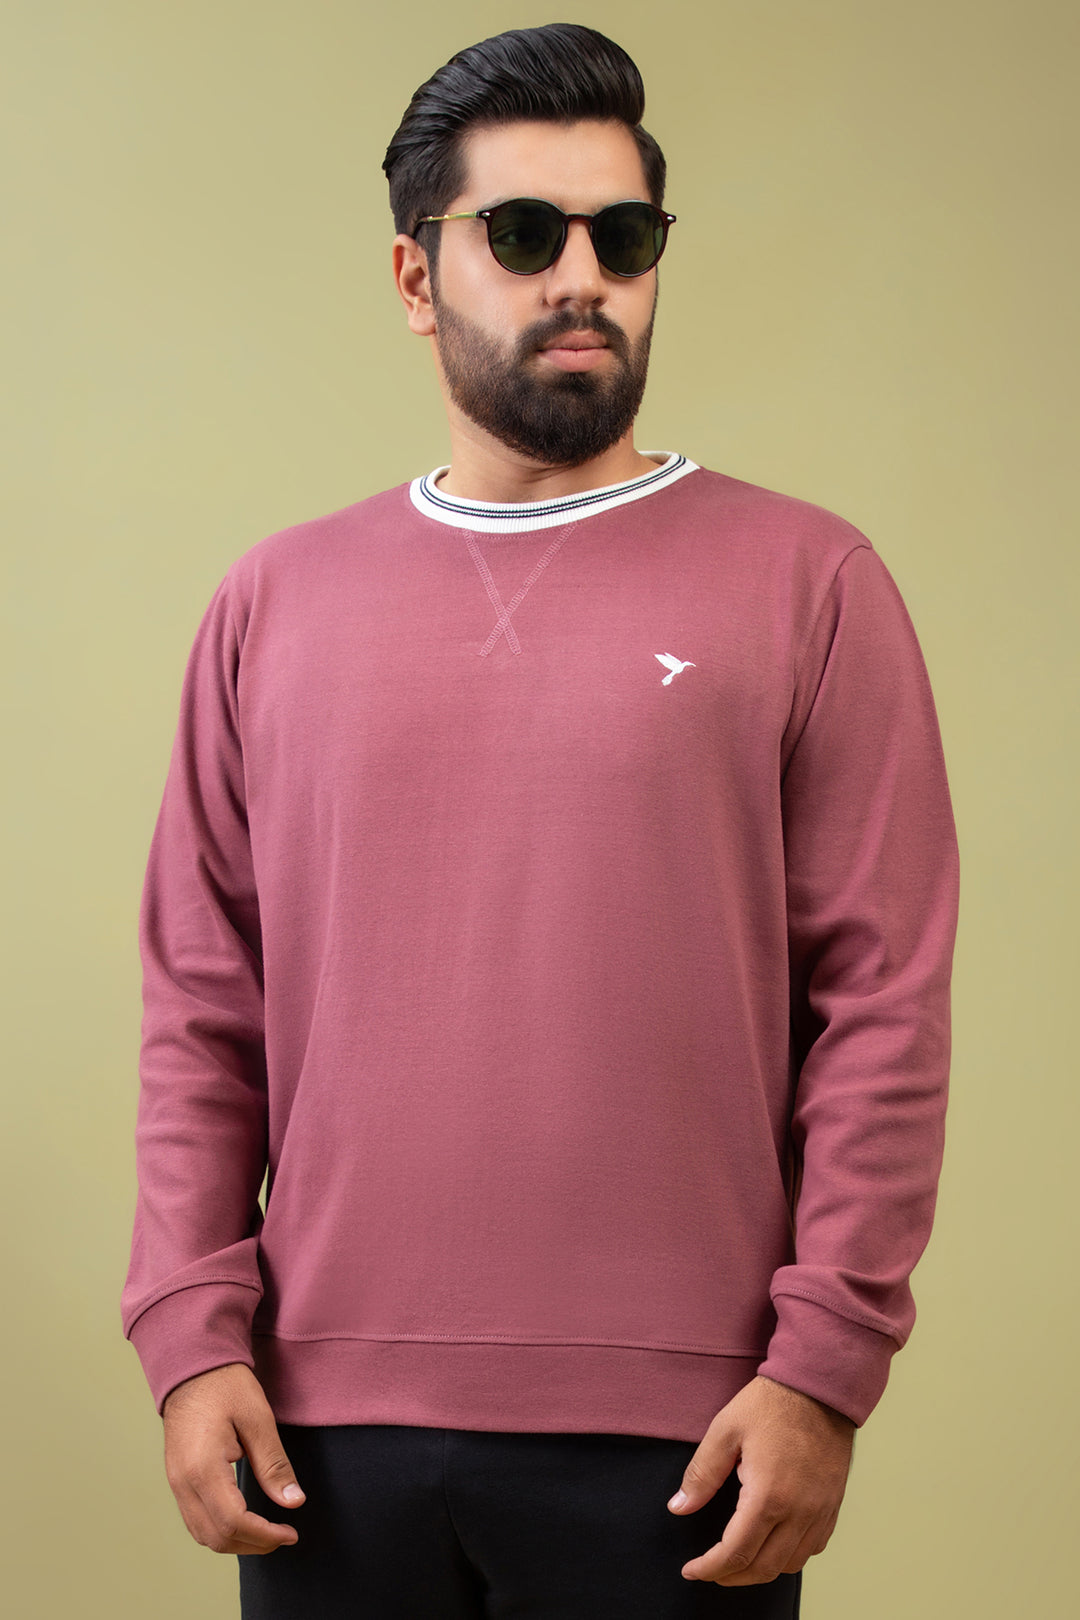 Dusty Rose Embroidered Sweatshirt (Plus Size) - W23 - MSW081P